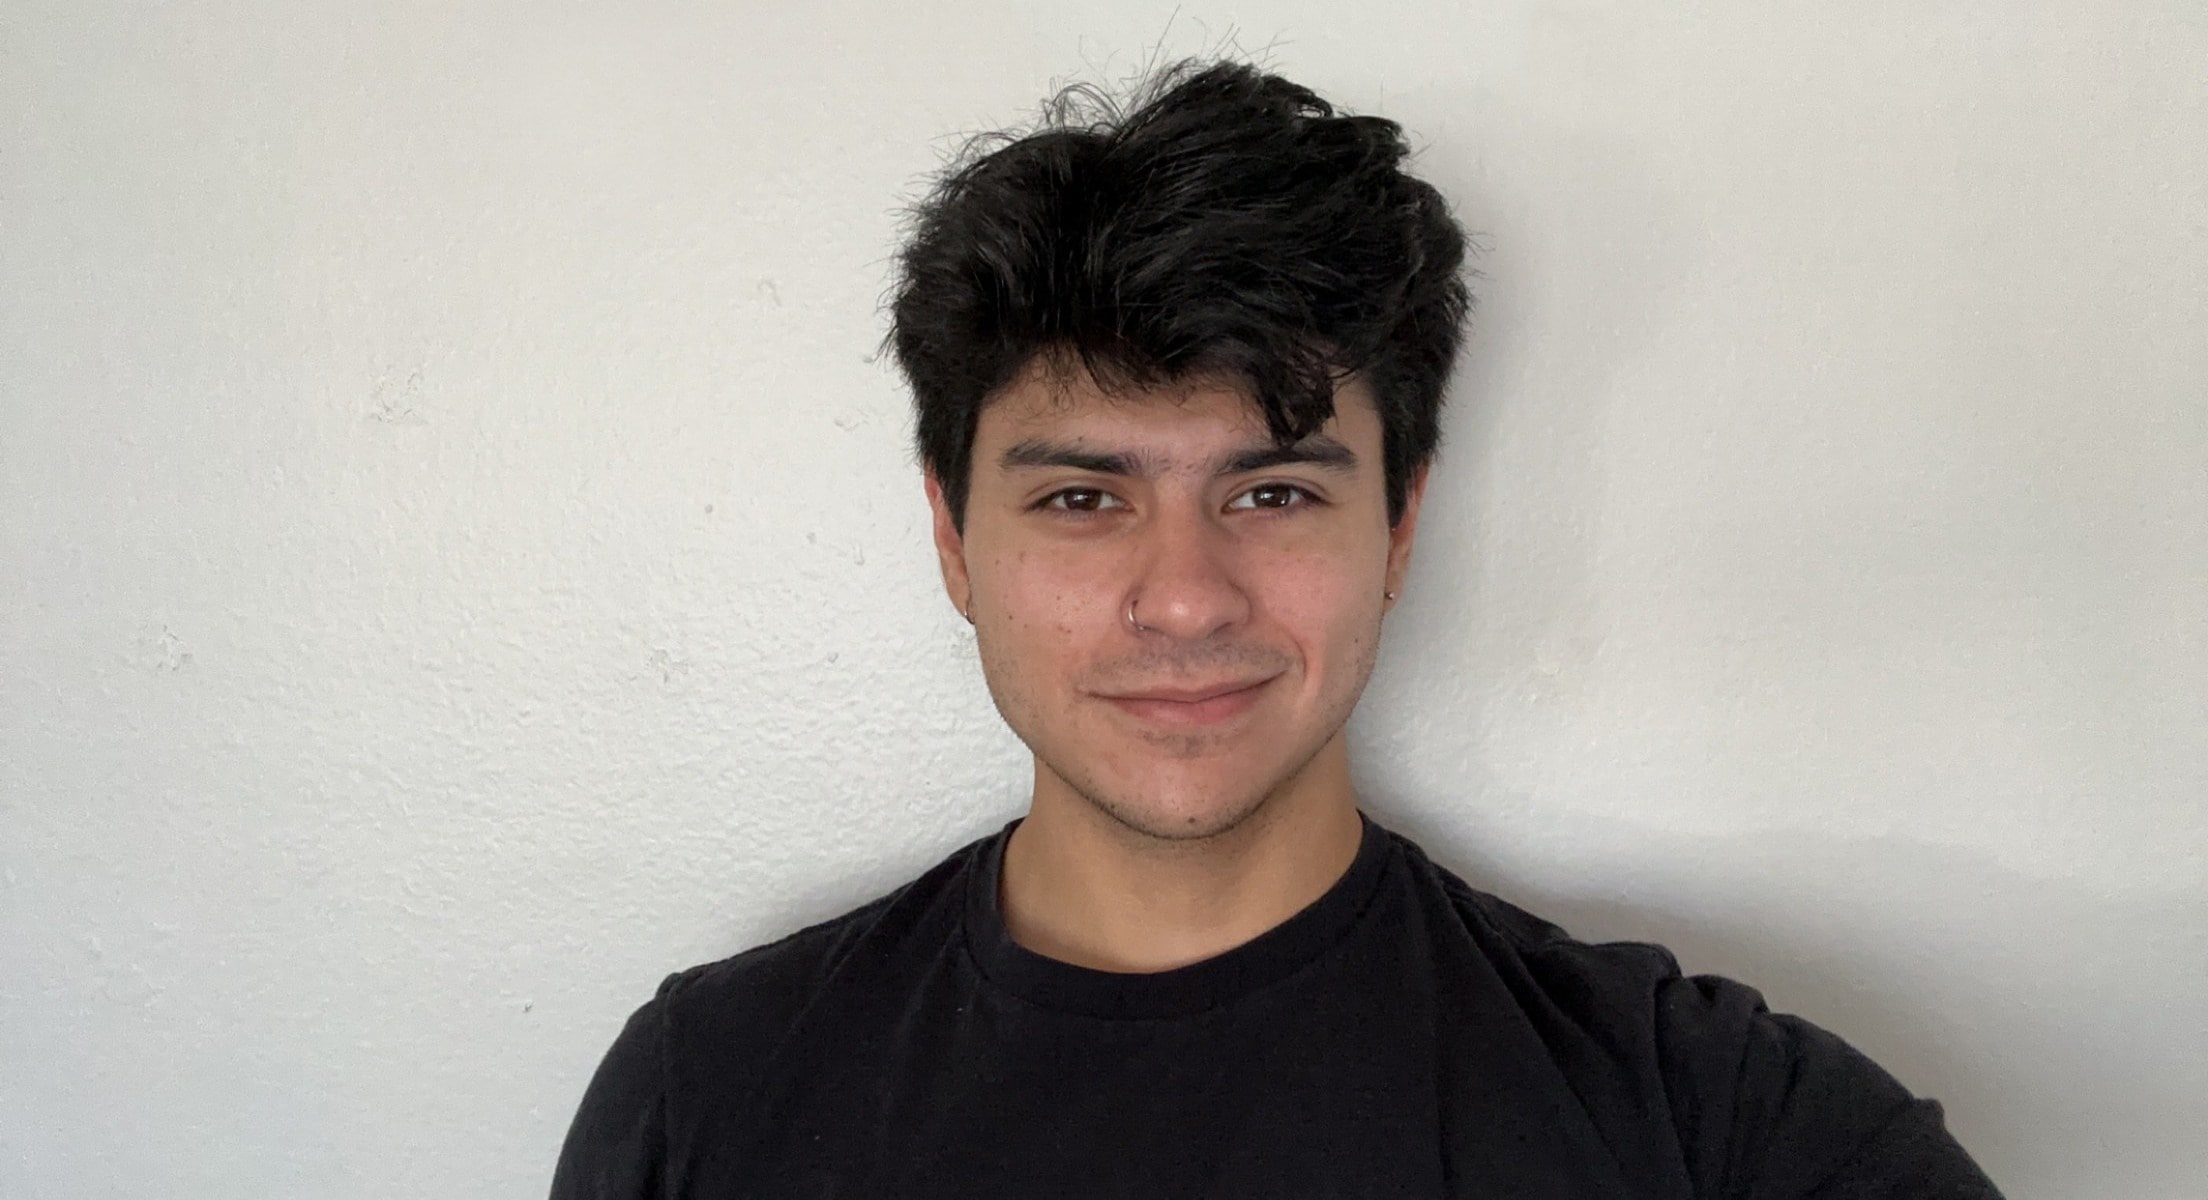 German Flores, an Intuit software engineer smiles for the camera against a white background